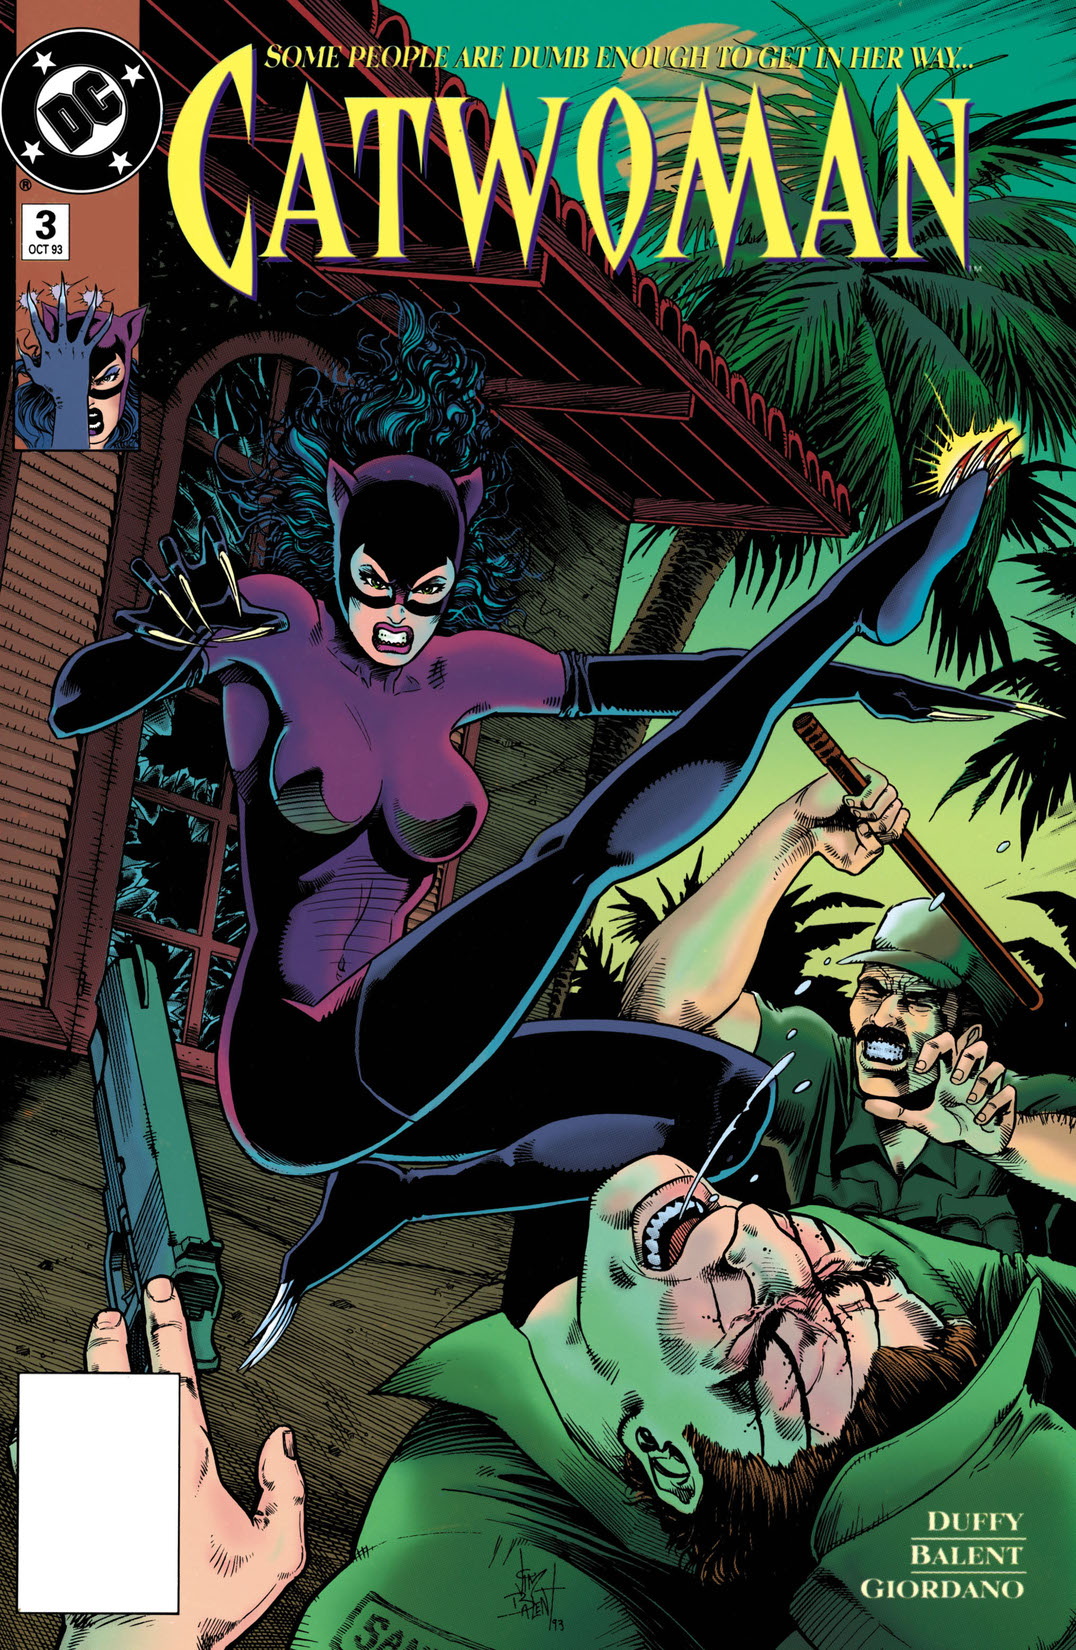 Catwoman (1993-) #3 preview images